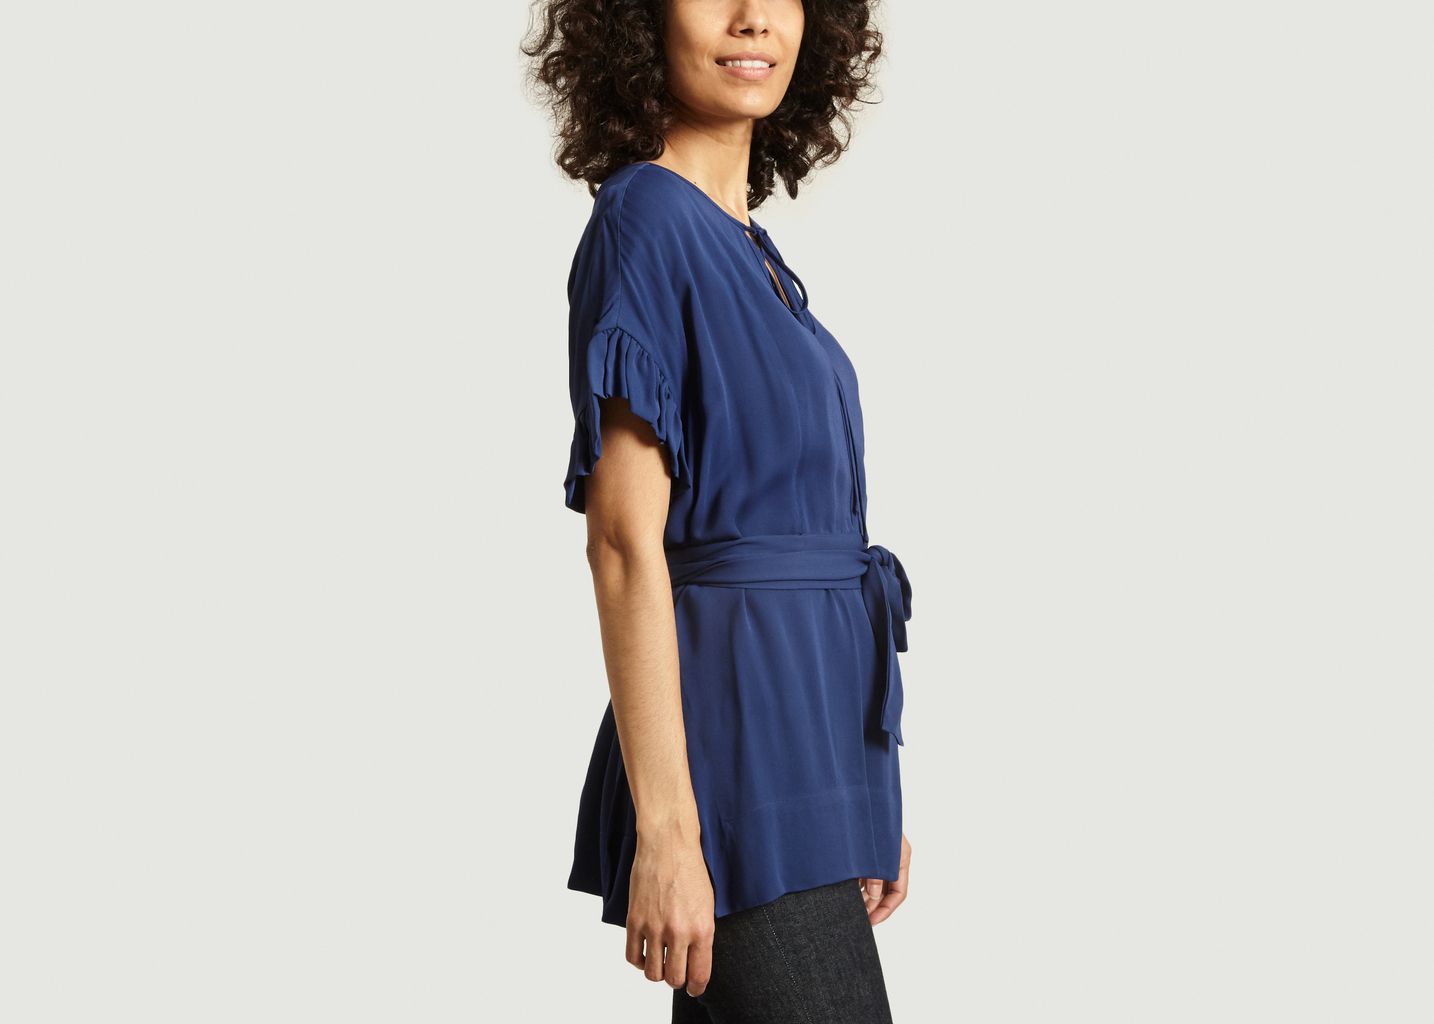 Belted Bai top - By Malene Birger